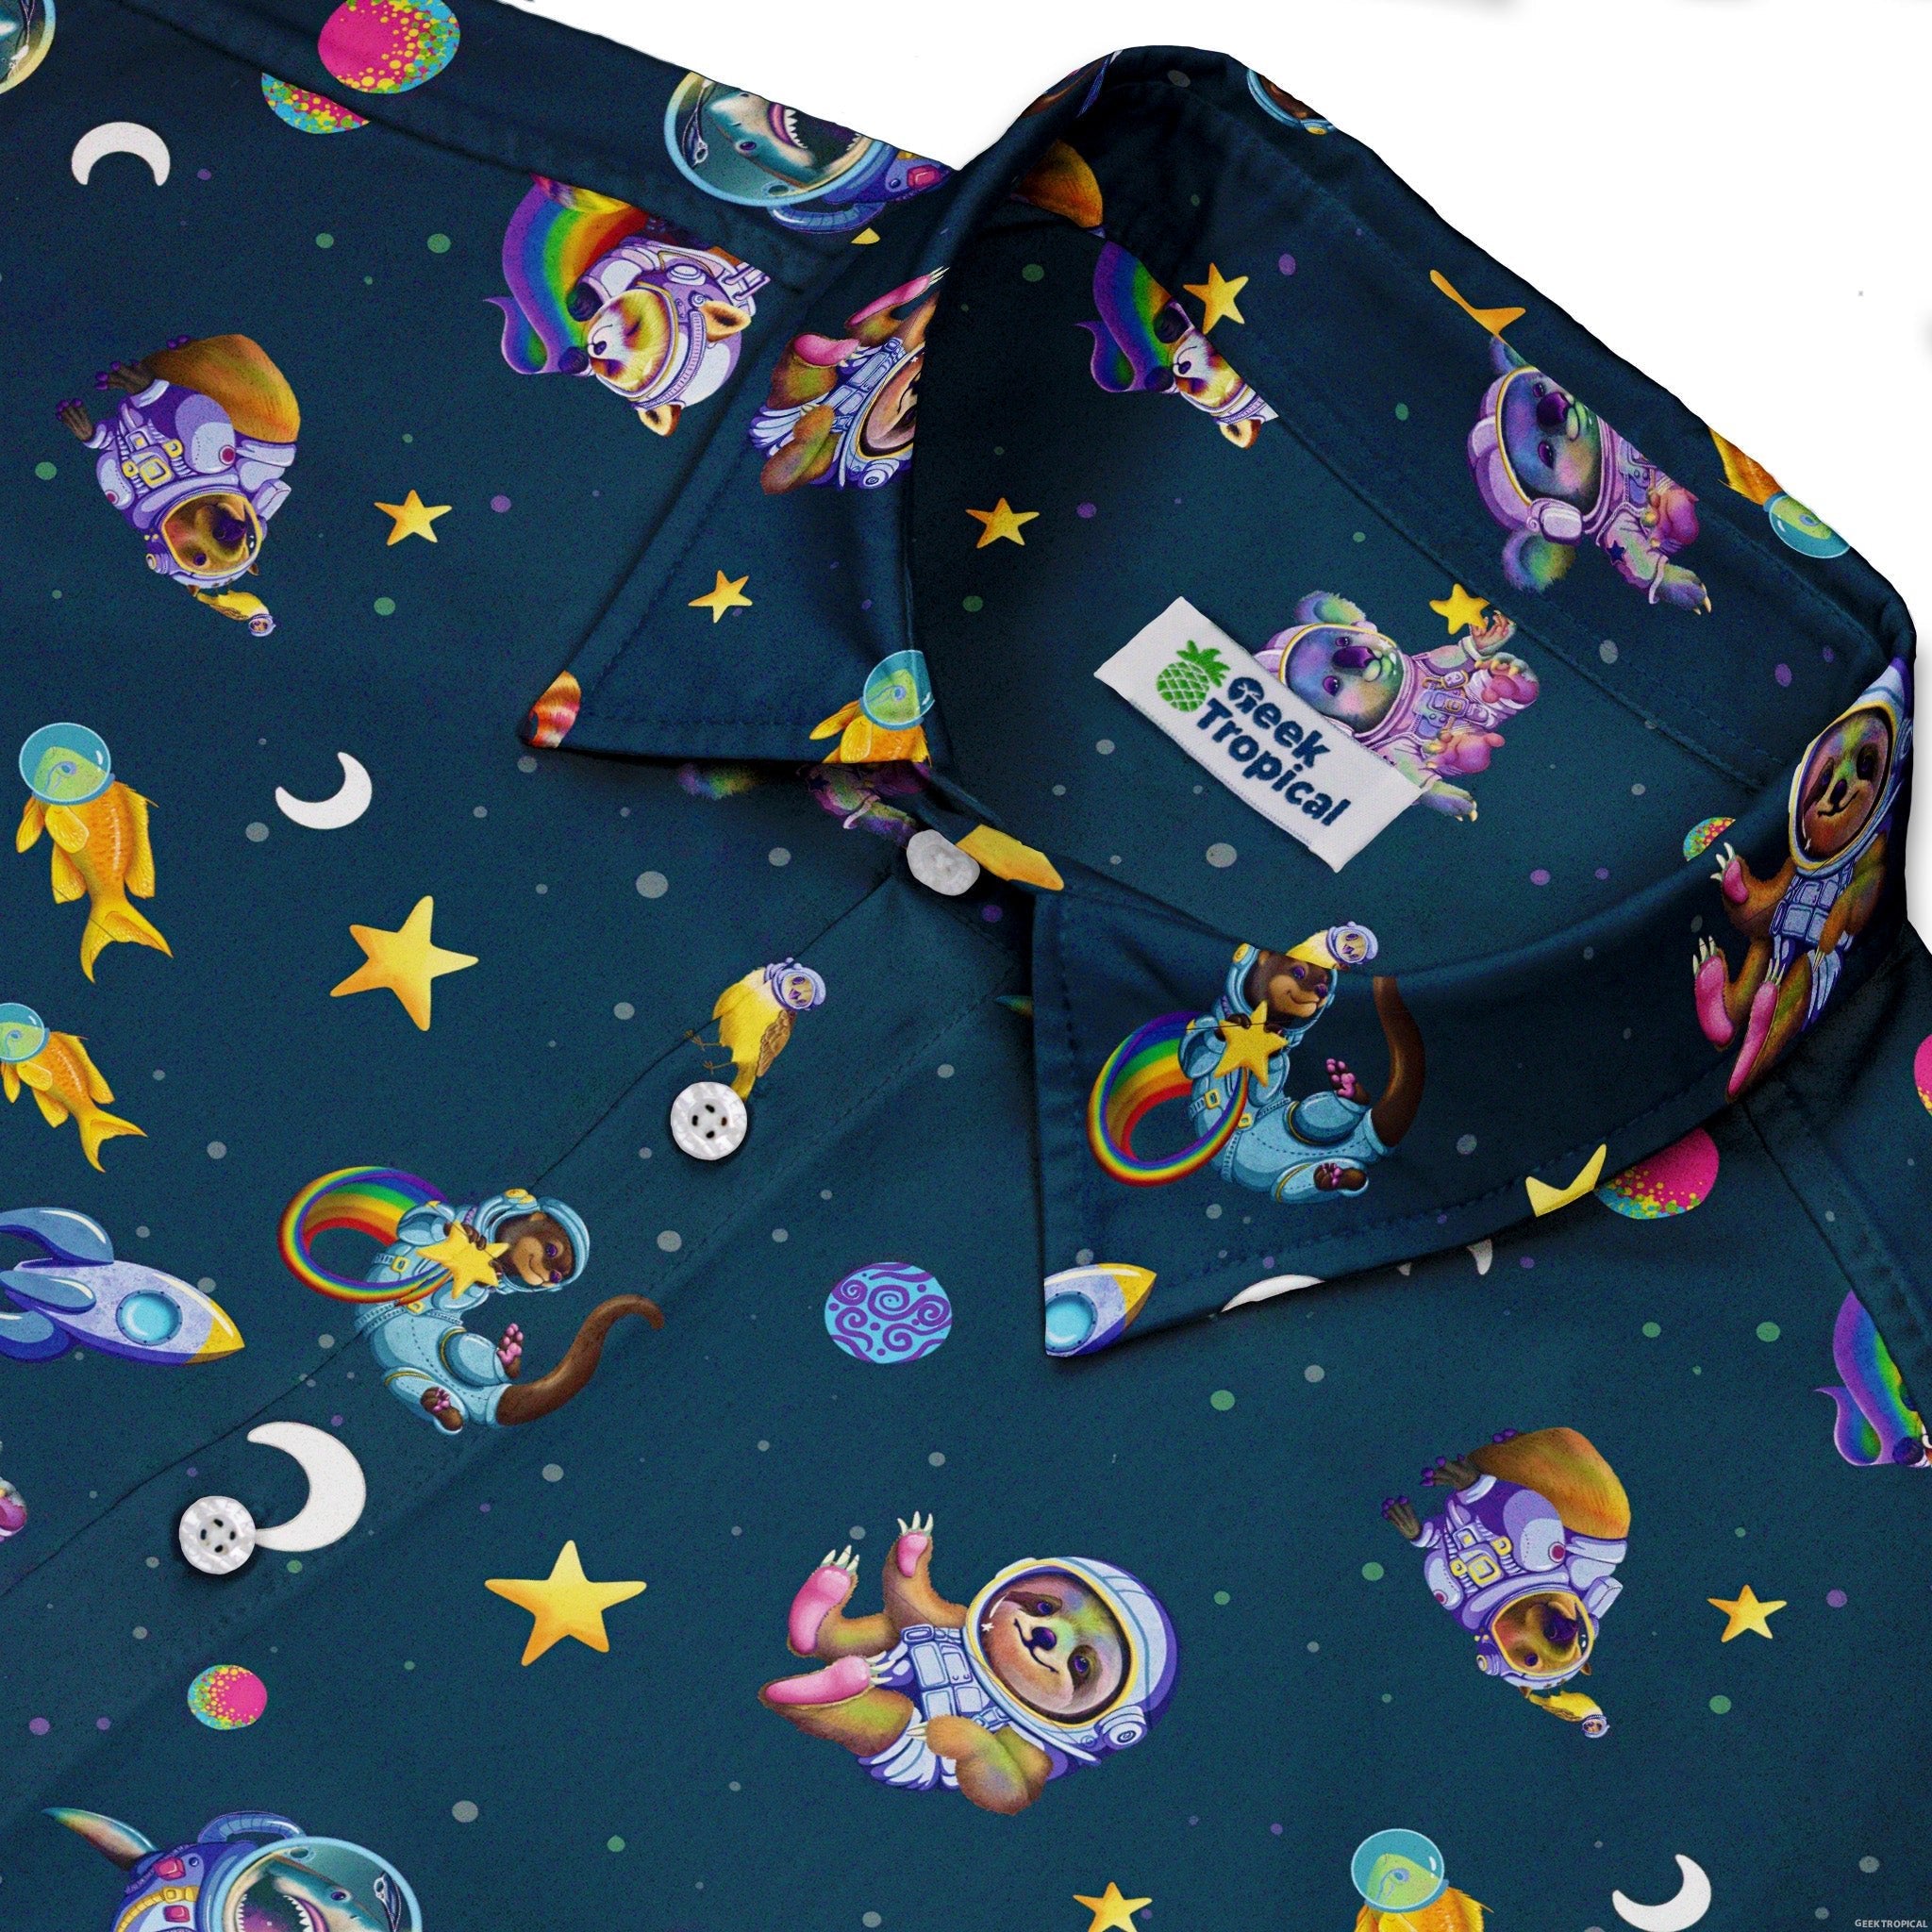 Animal Astronauts in Space Button Up Shirt - adult sizing - Animal Patterns - Design by Carla Morrow